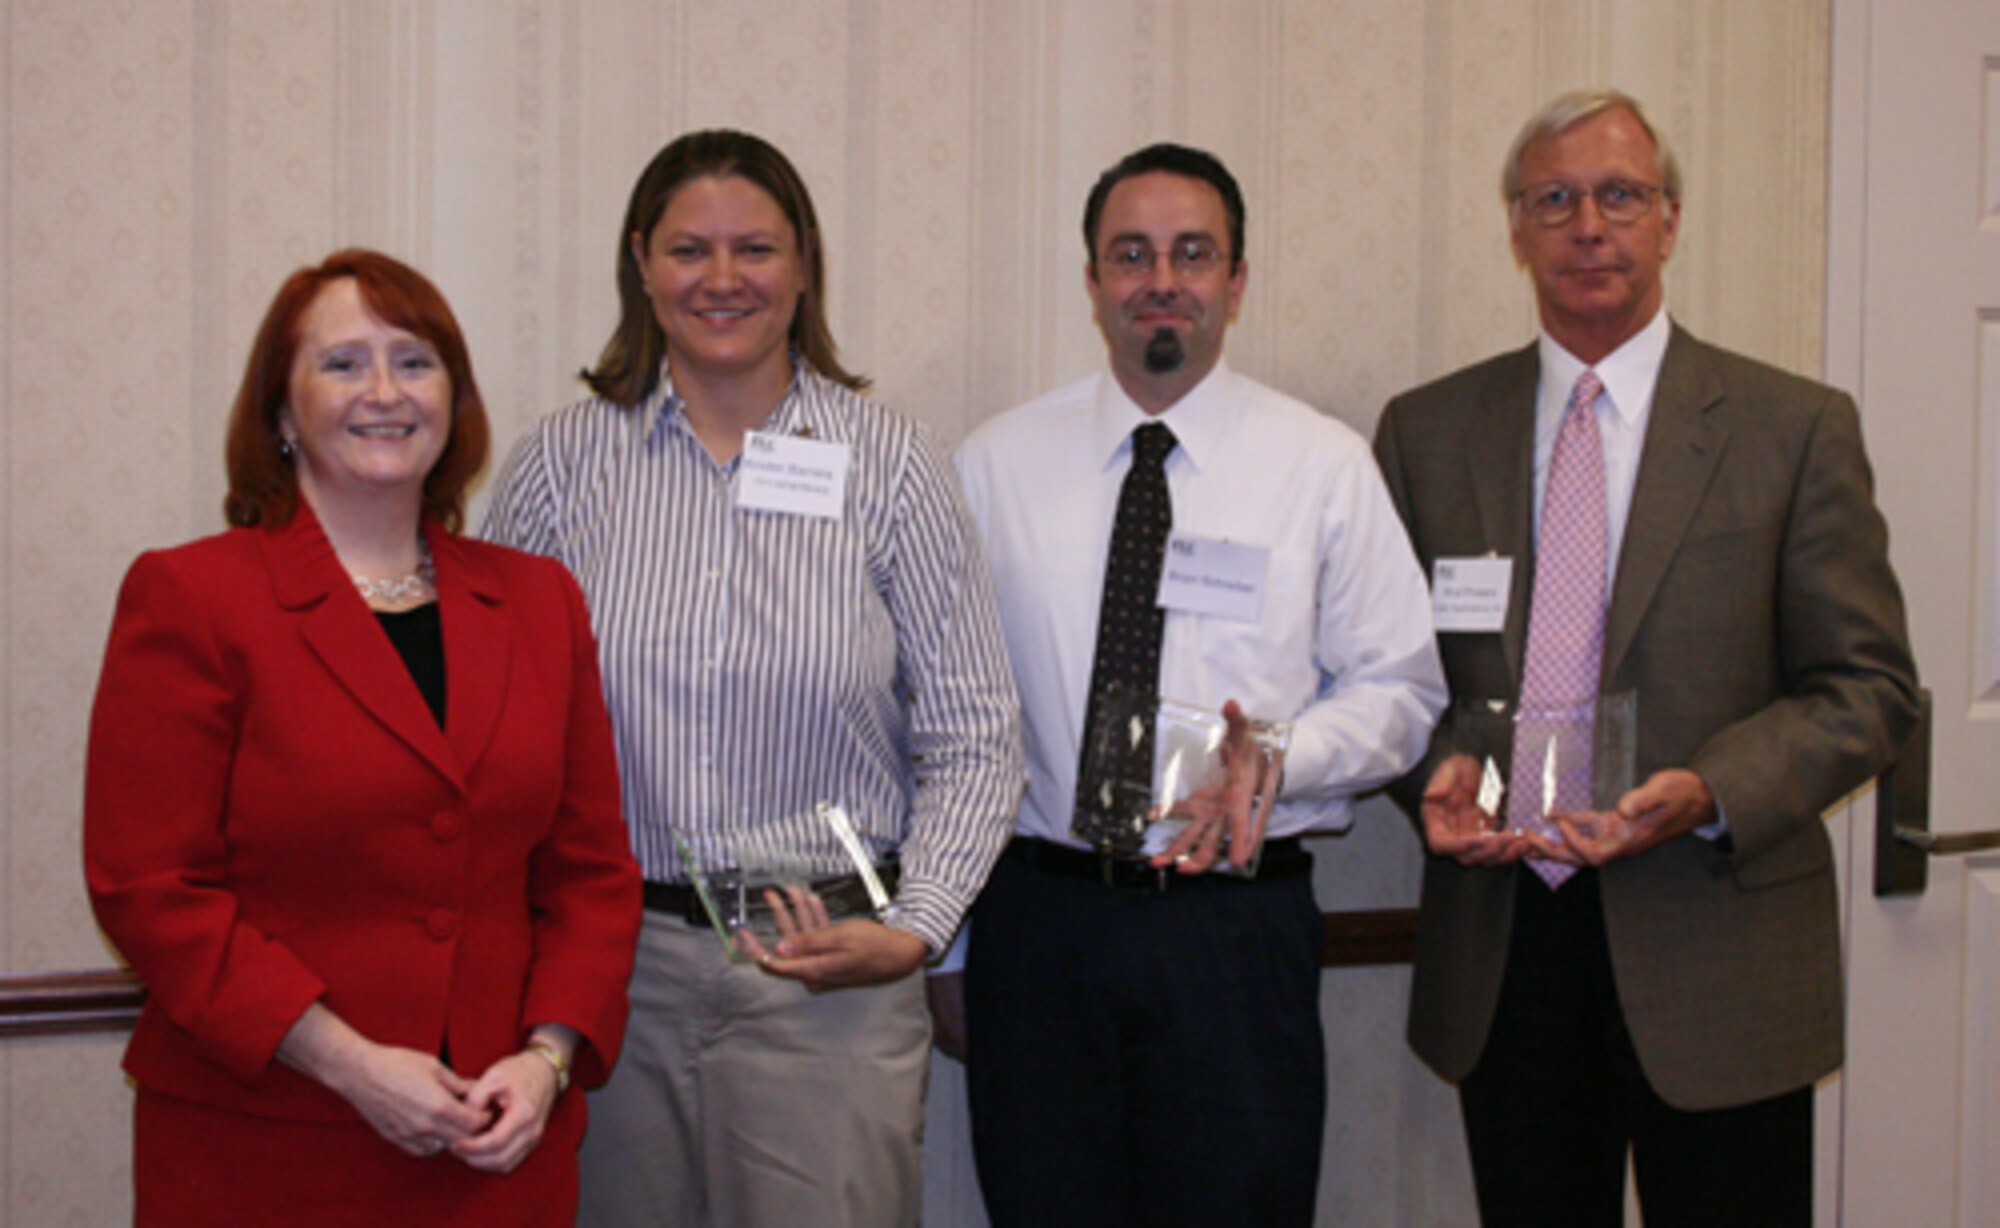 Kristen Schario (left), regional coordinator for the Federal Laboratory Consortium Midwest Region, presented an FLC Midwest Region Excellence in Technology Transfer Award for AFRL’s Live-Virtual-Constructive technology to (from second-left) Kristen Barrera, LVC program manager; and AFRL collaborators Brian Schreiber of LUMIR Research, Inc. and Rod Powers from Cubic Applications, Inc. (Photo by Amanda Snyder, FLC)